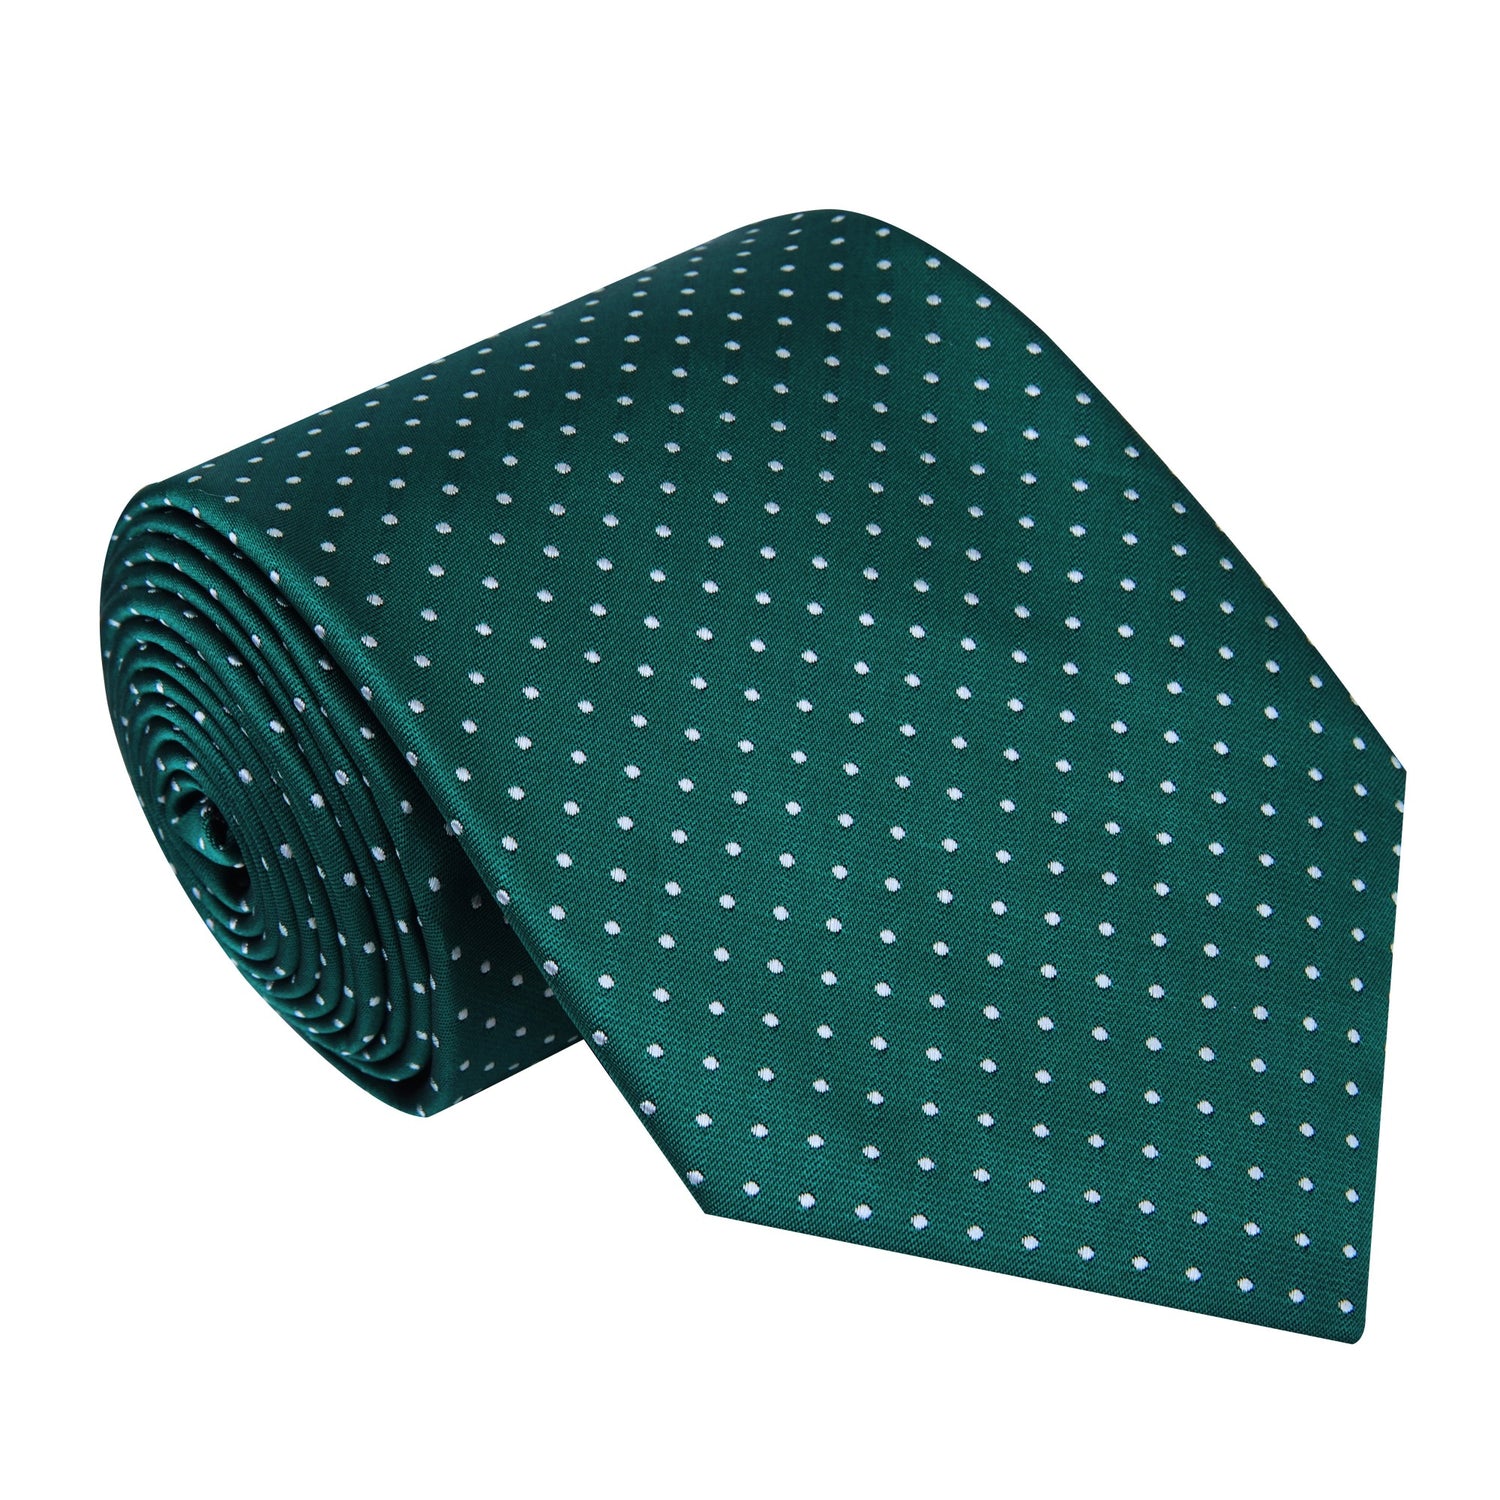 A Green and White Polka tie